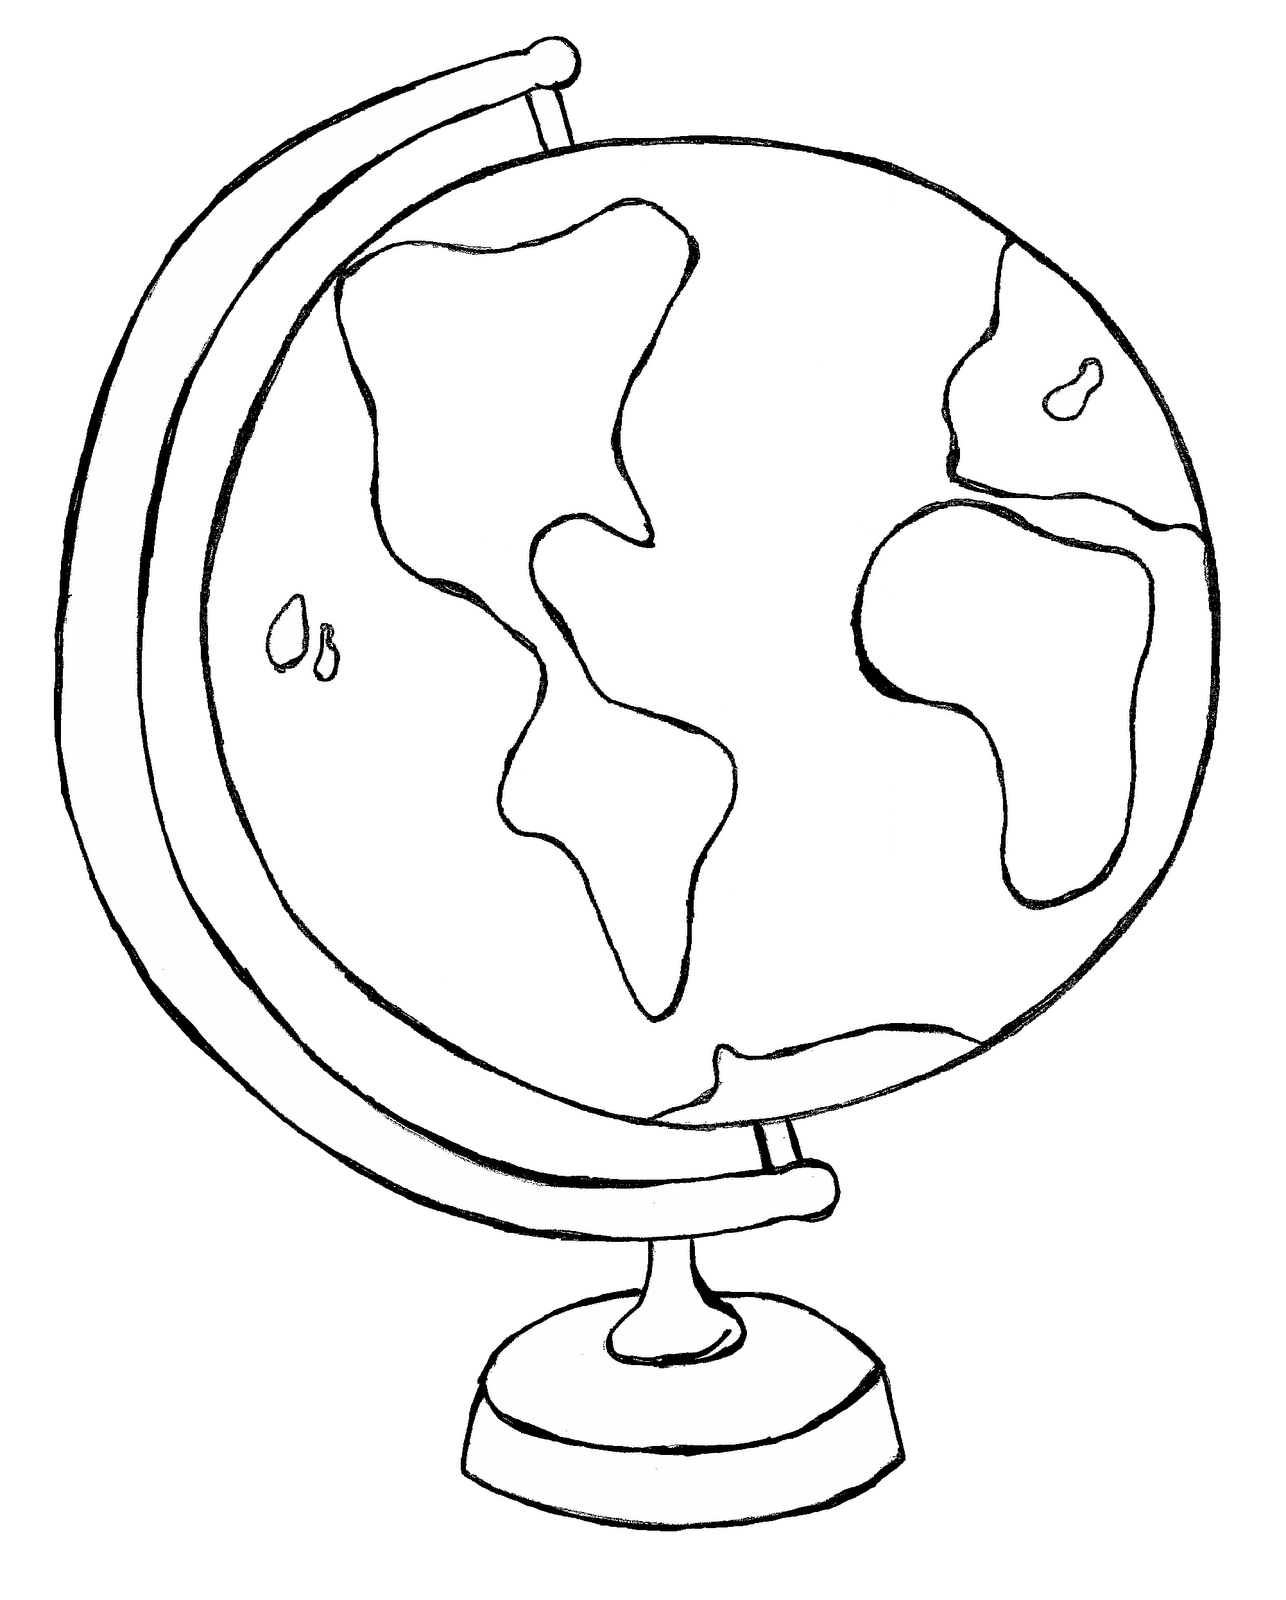 Clip art of world clipart 2 image 5 2